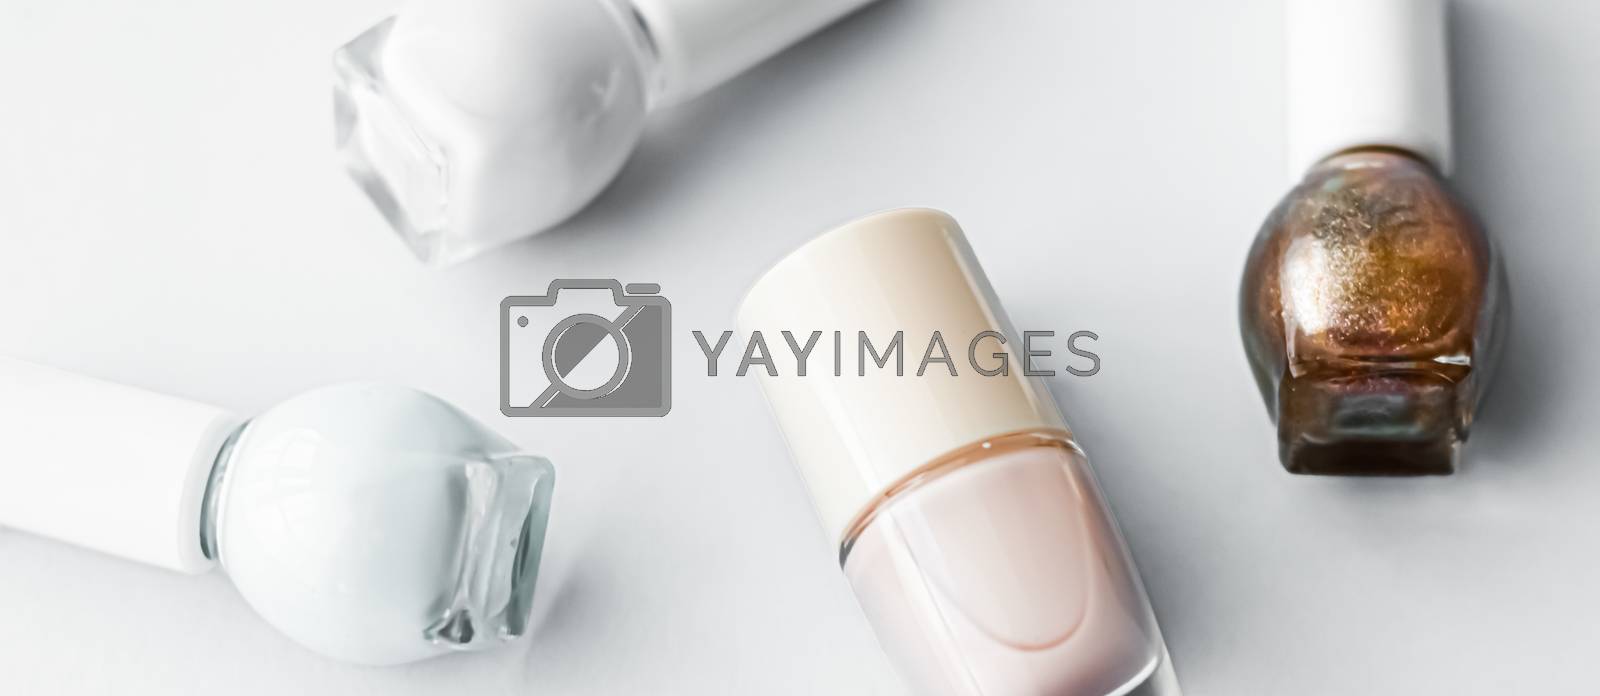 Royalty free image of Nail polish bottles on white background, beauty brand by Anneleven